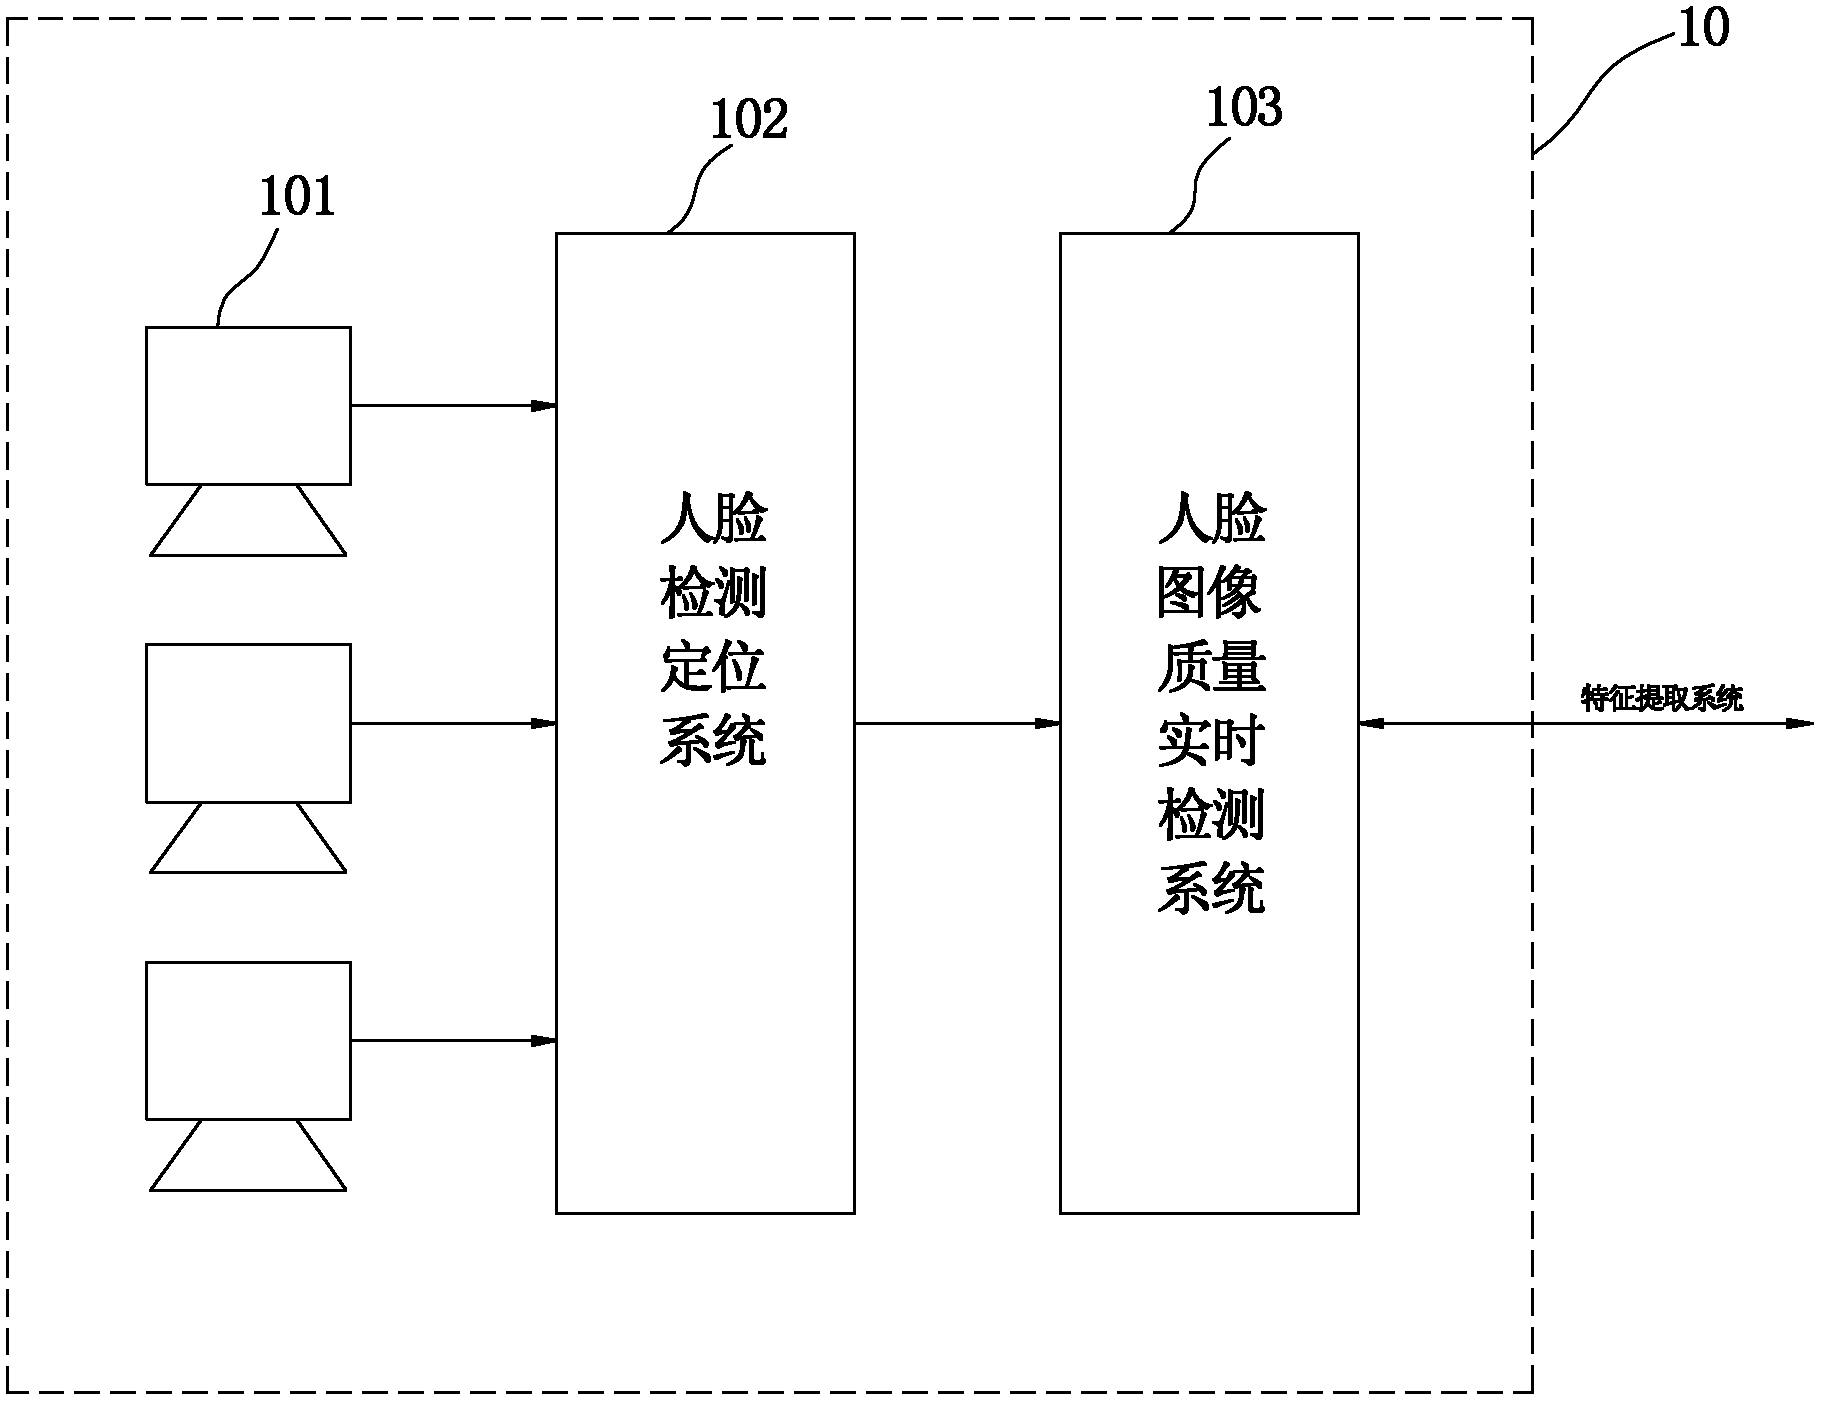 Intelligent safety monitoring system and method based on multilevel filtering face recognition